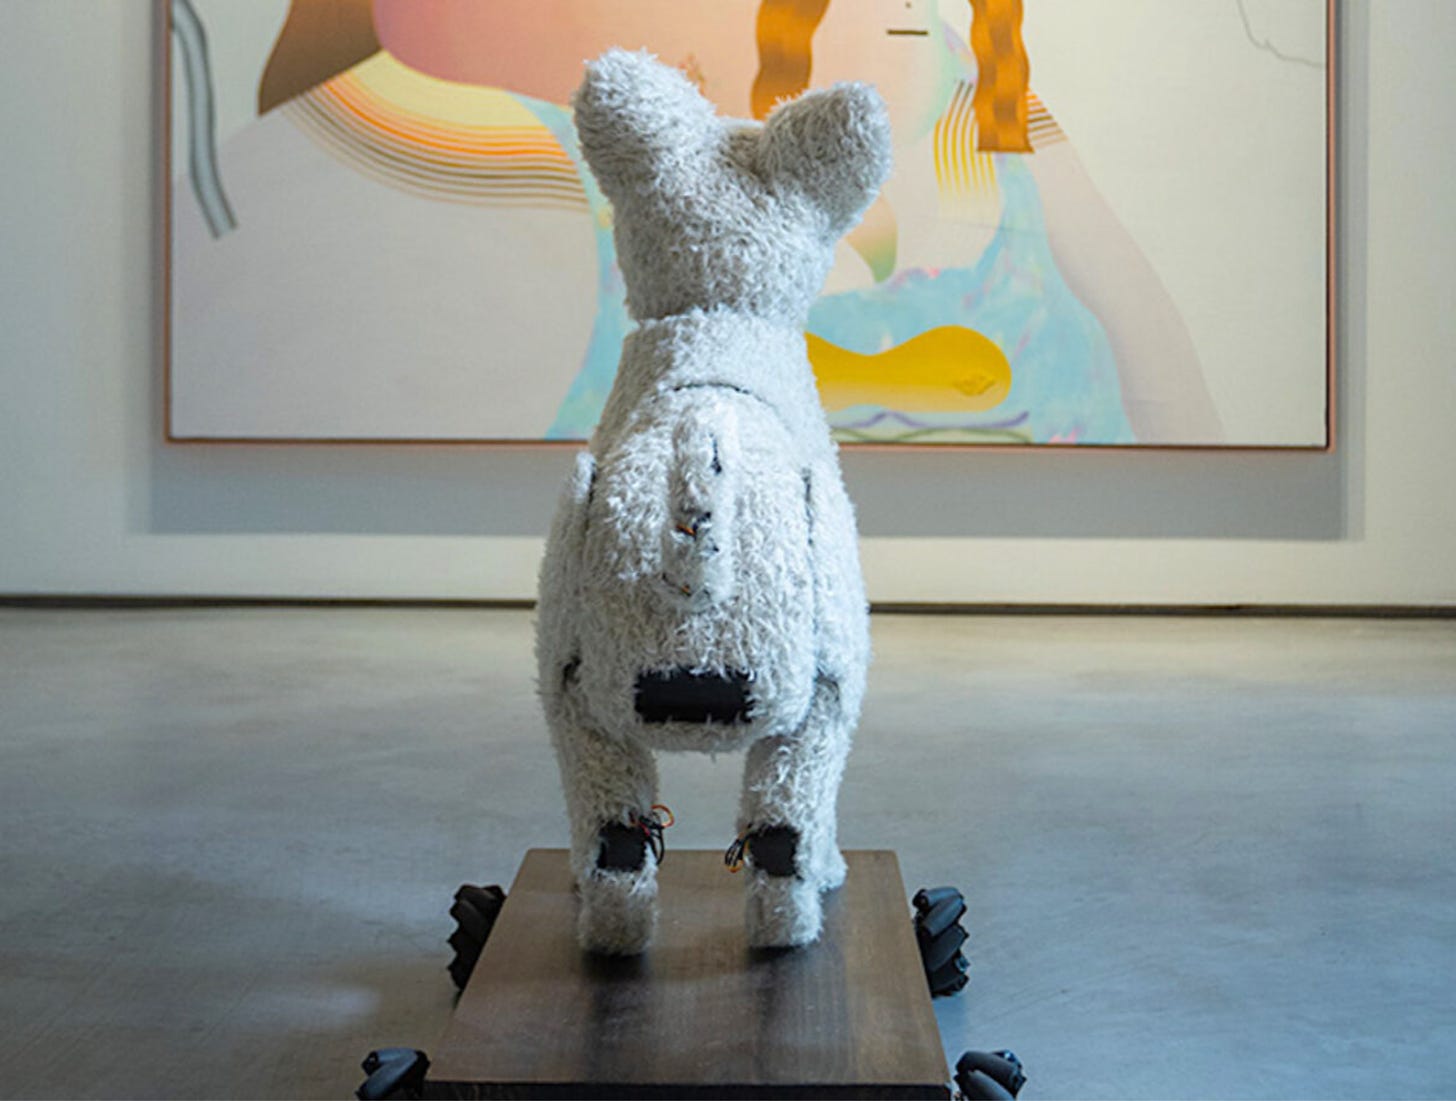 A view from behind a toy dog. The dog is on a platform on wheels and it's considering an artwork in front of it 